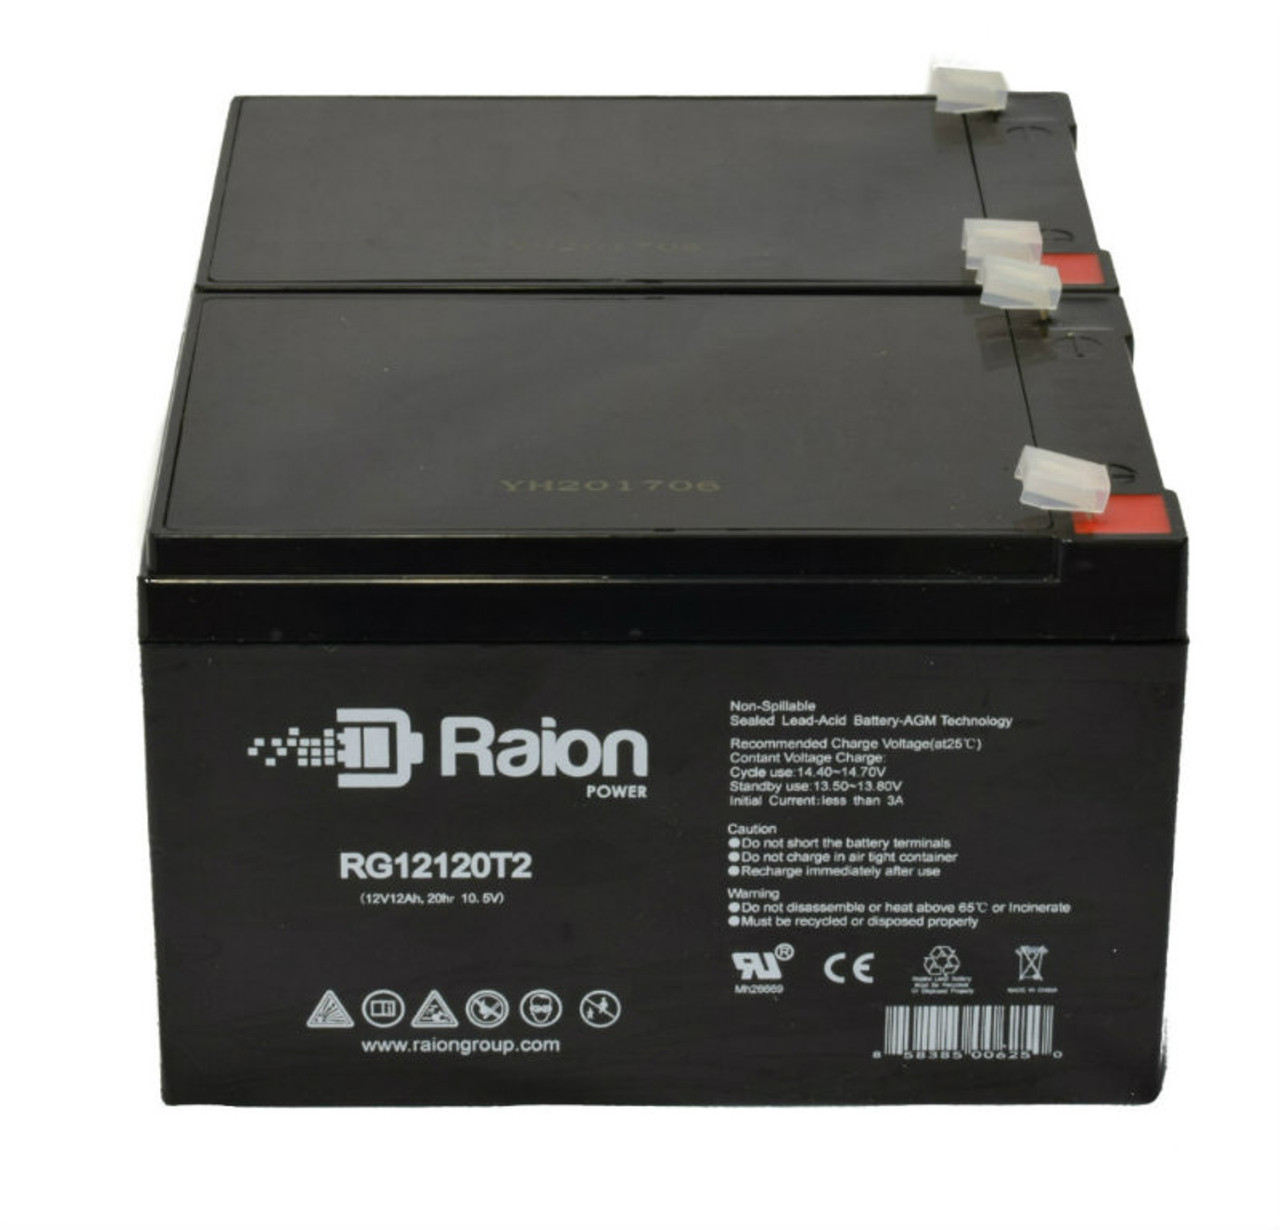 Raion Power 12V 12Ah Non-Spillable Compatible Replacement Battery for Duracell DURA12-12F - (2 Pack)